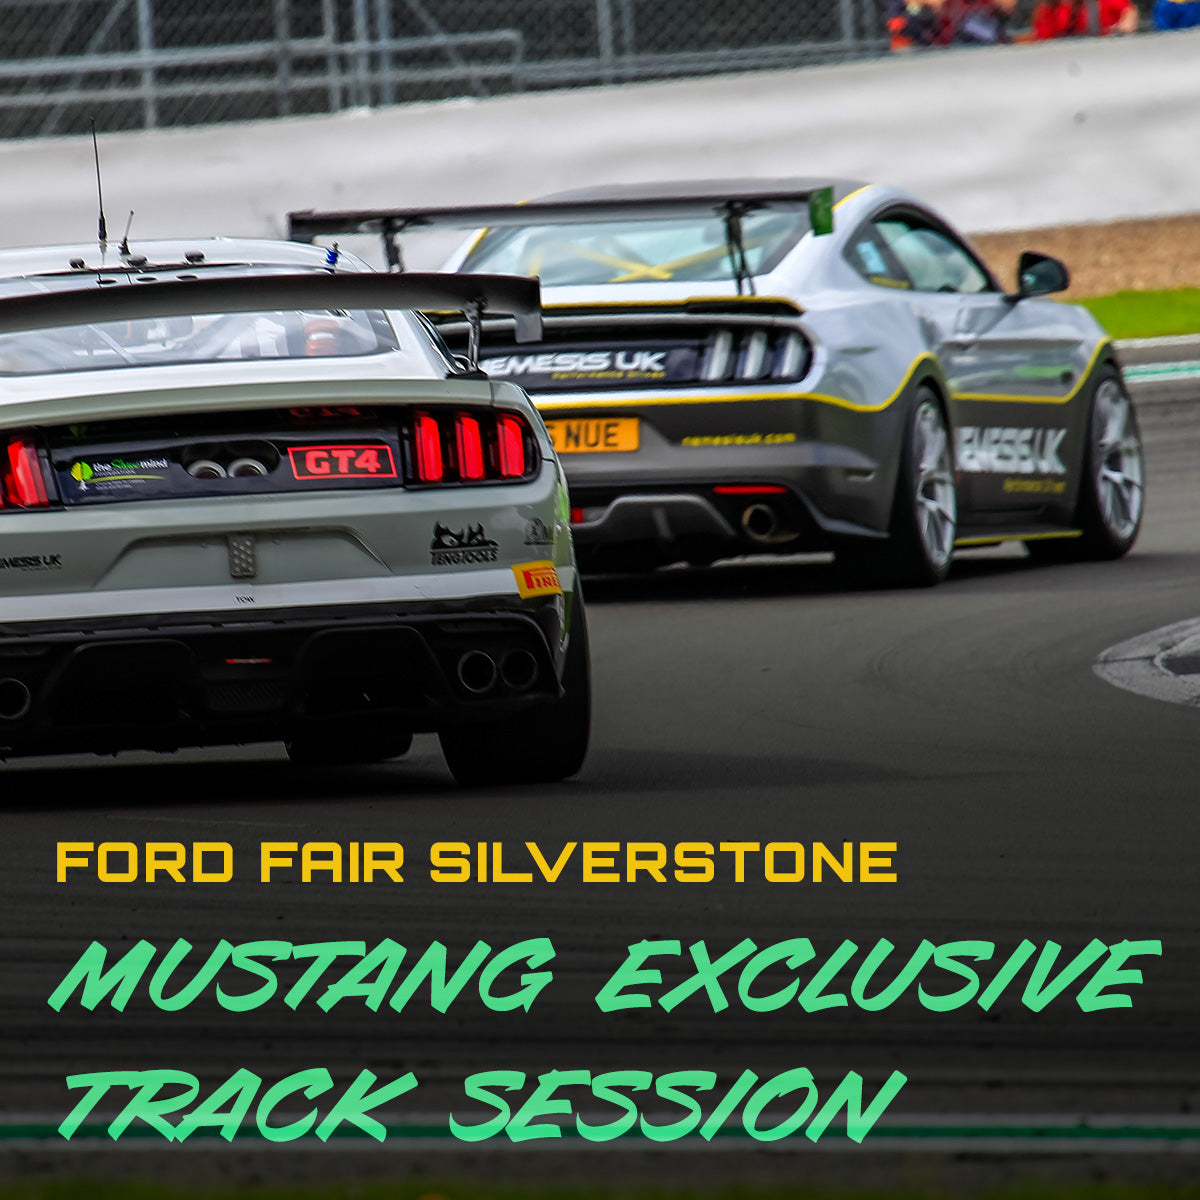 Promo image for nemesis uk ford fair 2024 exclusive mustang track session,. 2 high performance mustangs on track at silverstone